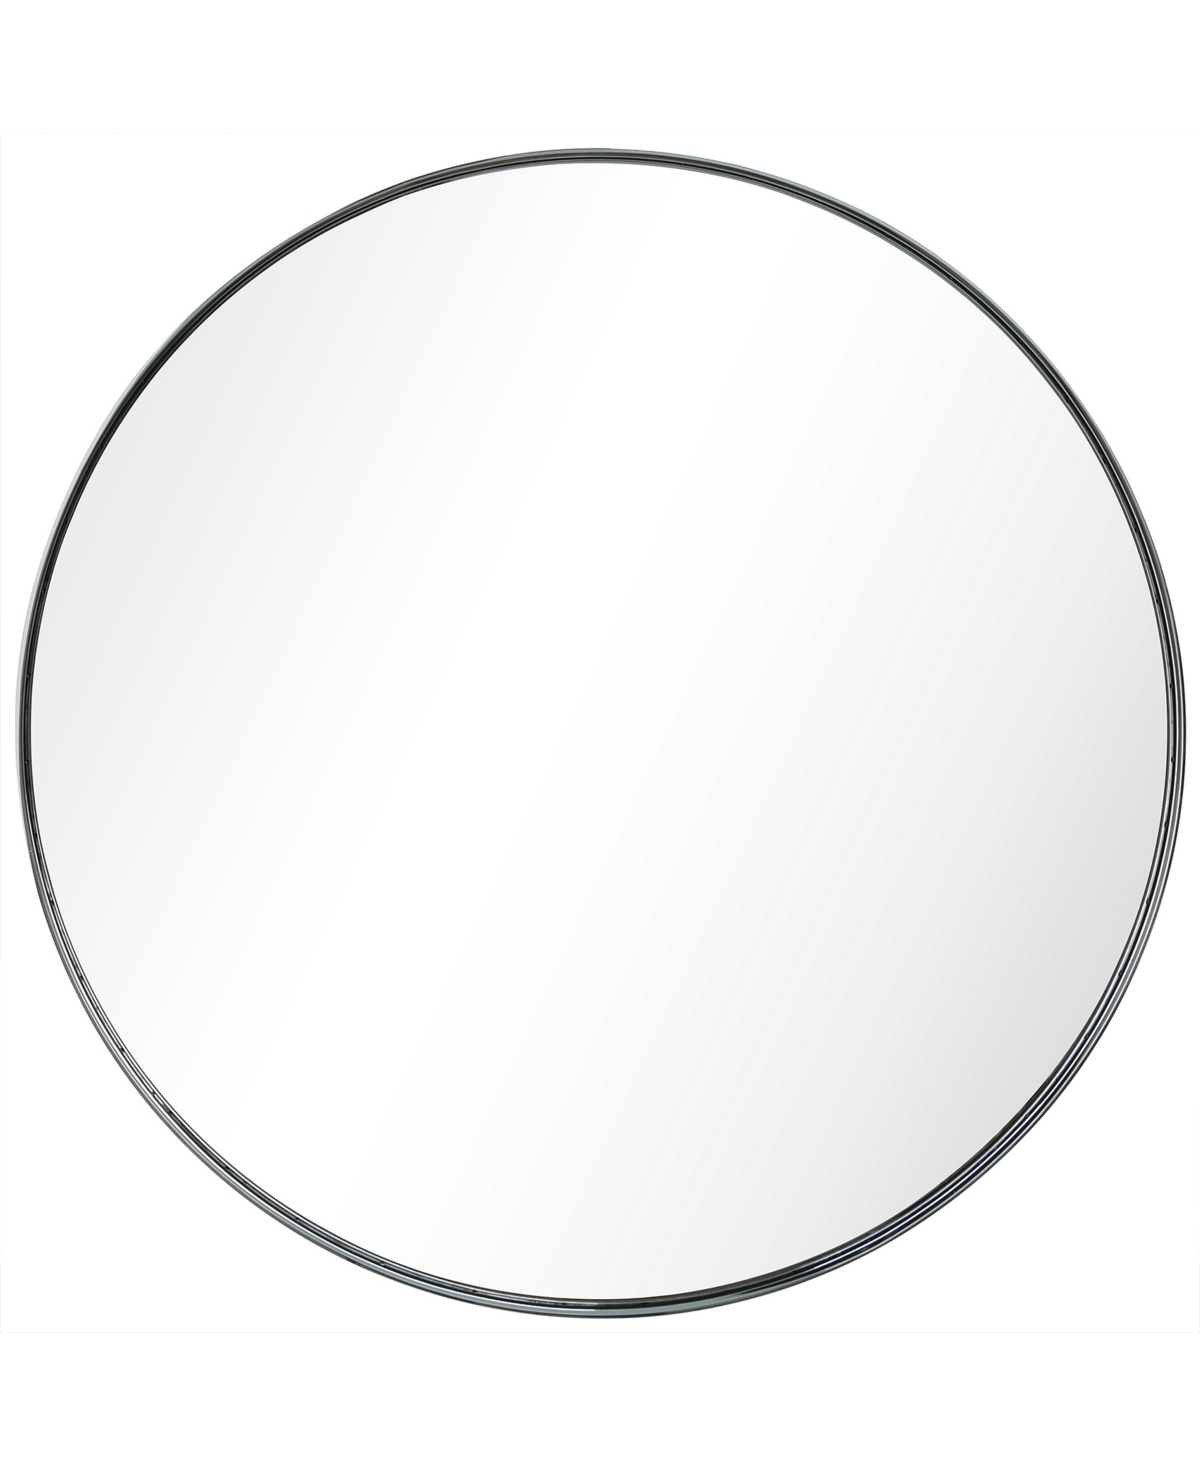 Ultra Polished Stainless Steel Round Wall Mirror, 30" x 30" - Silver-Tone